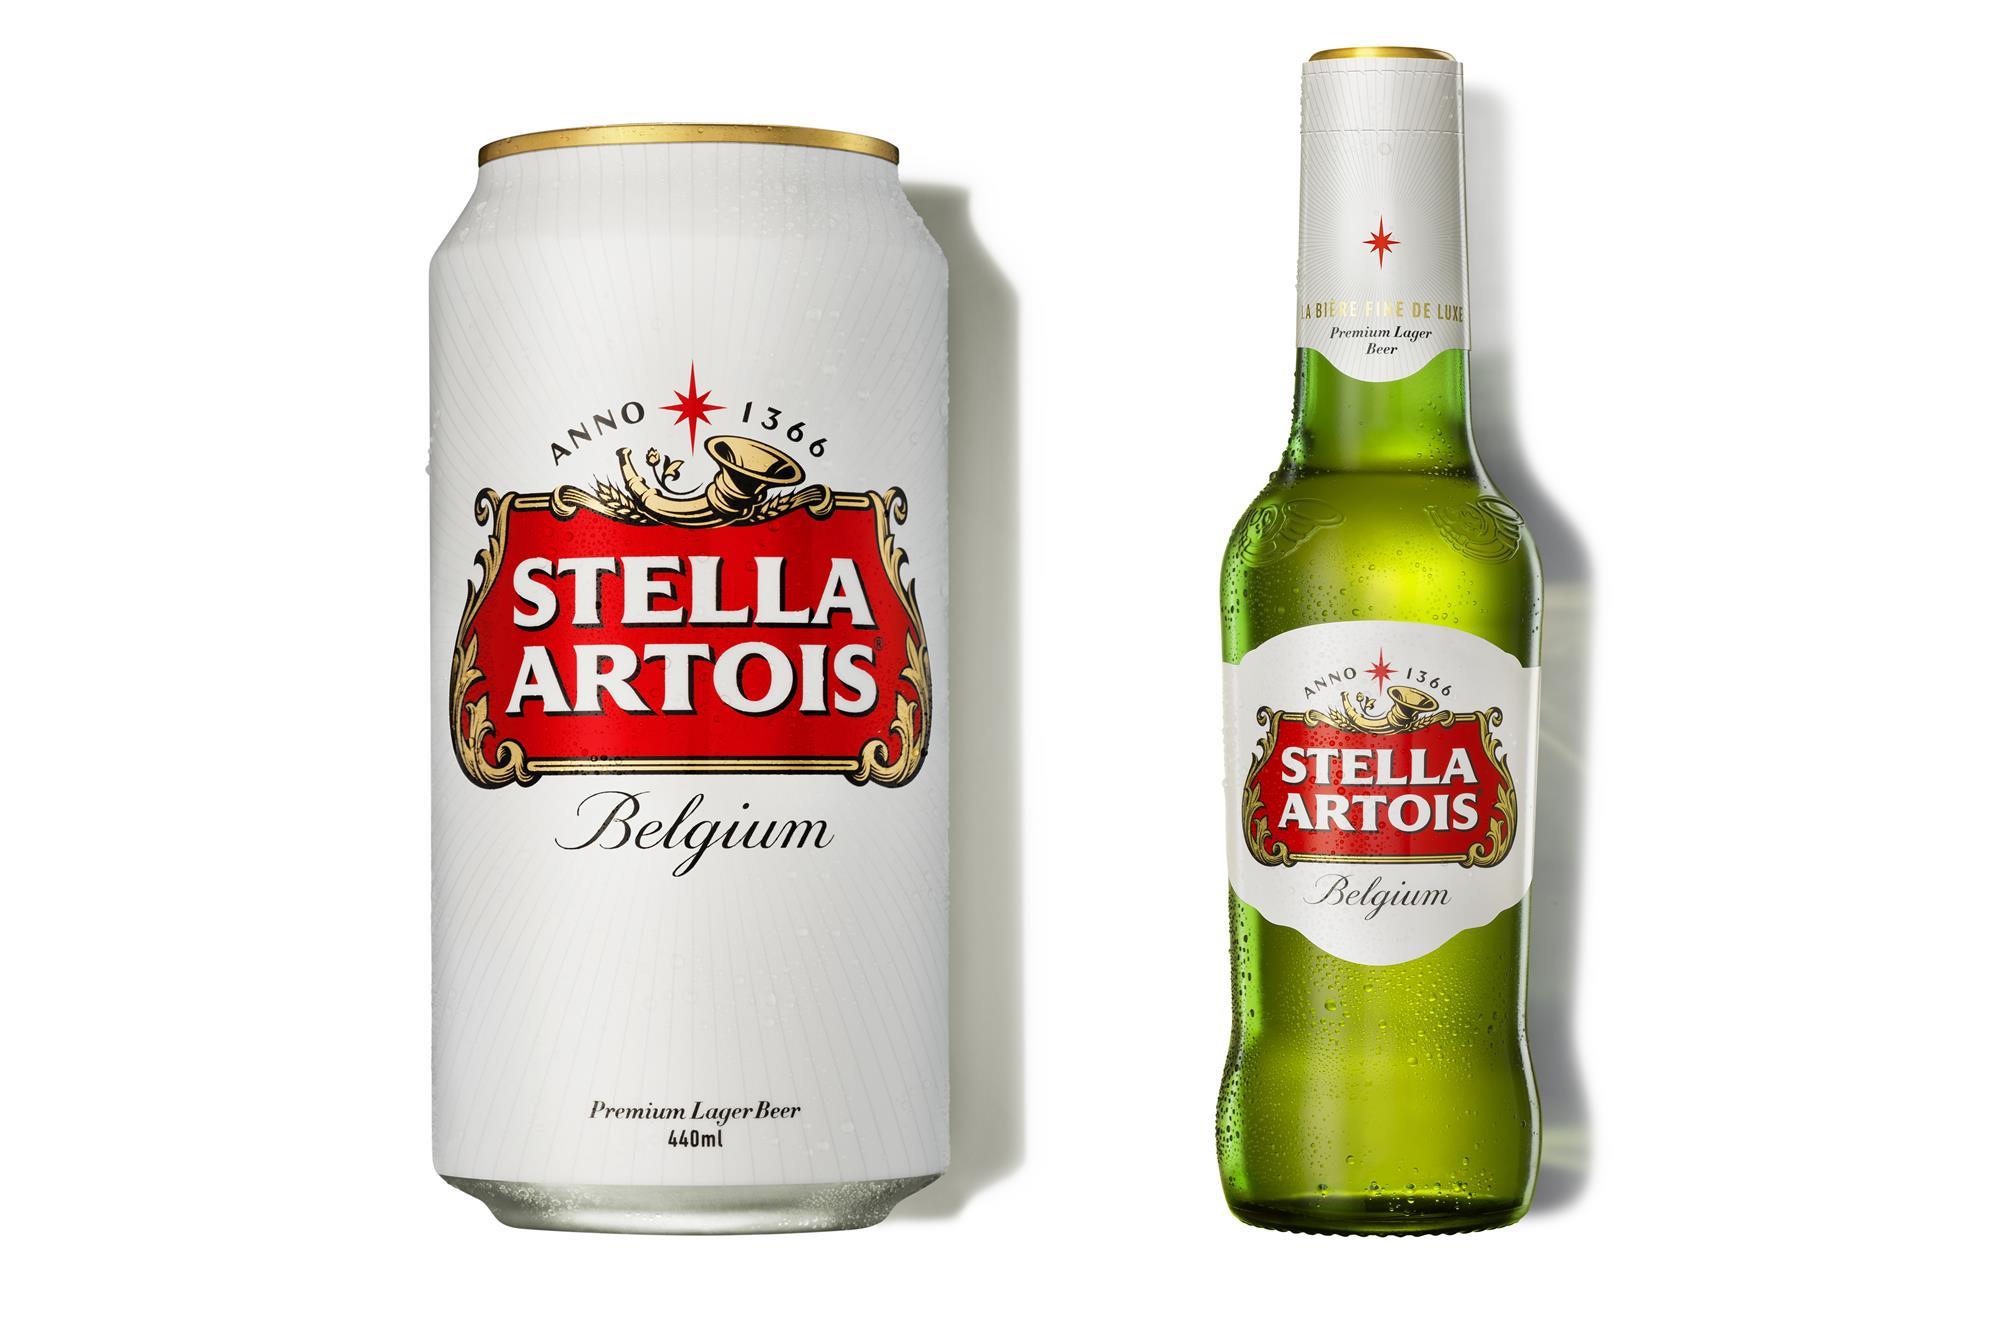 new-packaging-design-for-stella-artois-product-news-convenience-store